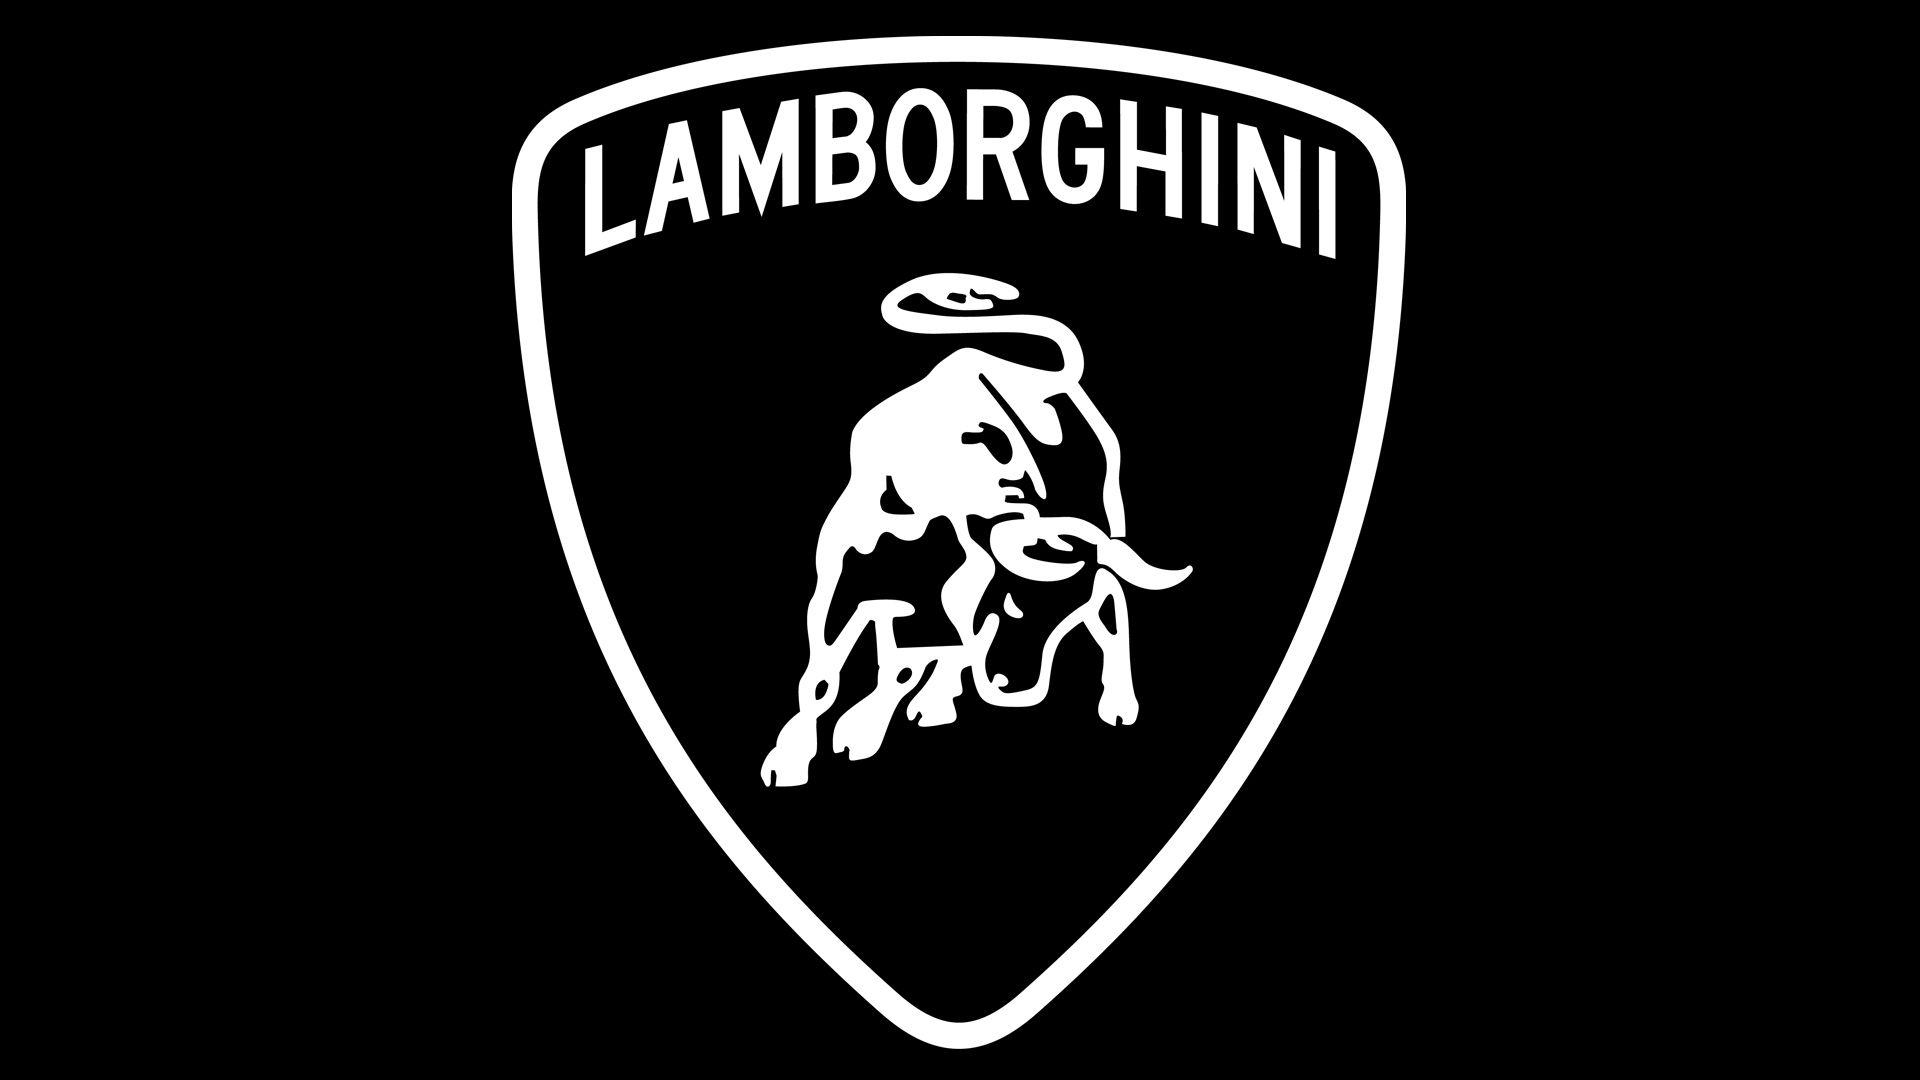 Lamborghini Logo - Lamborghini Logo, Lamborghini Symbol, Meaning, History and Evolution